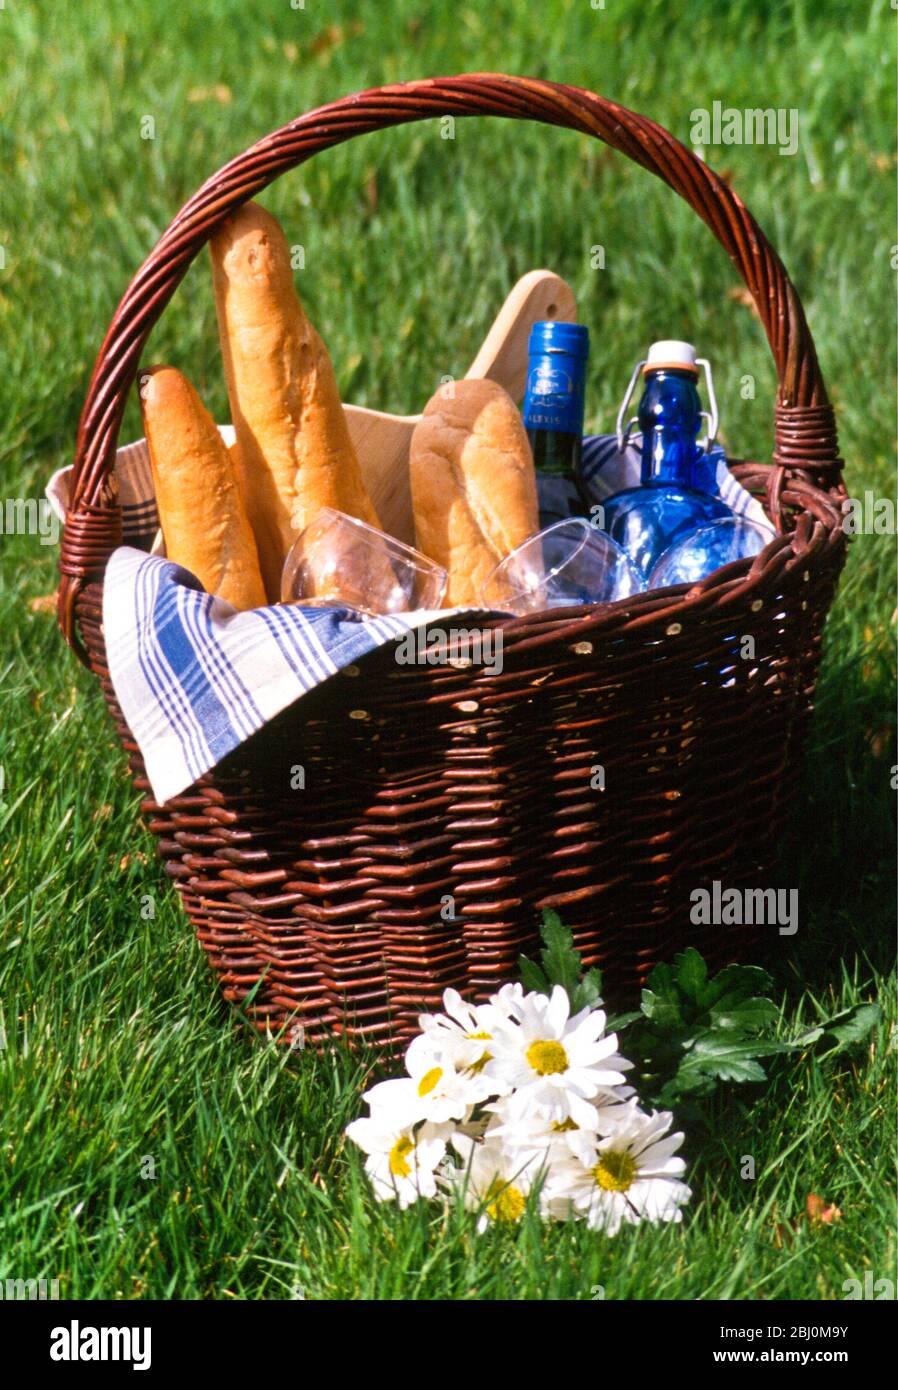 Picnic basket with french bread, glasses and bottles sitting on grass with bunch of daisies - Stock Photo